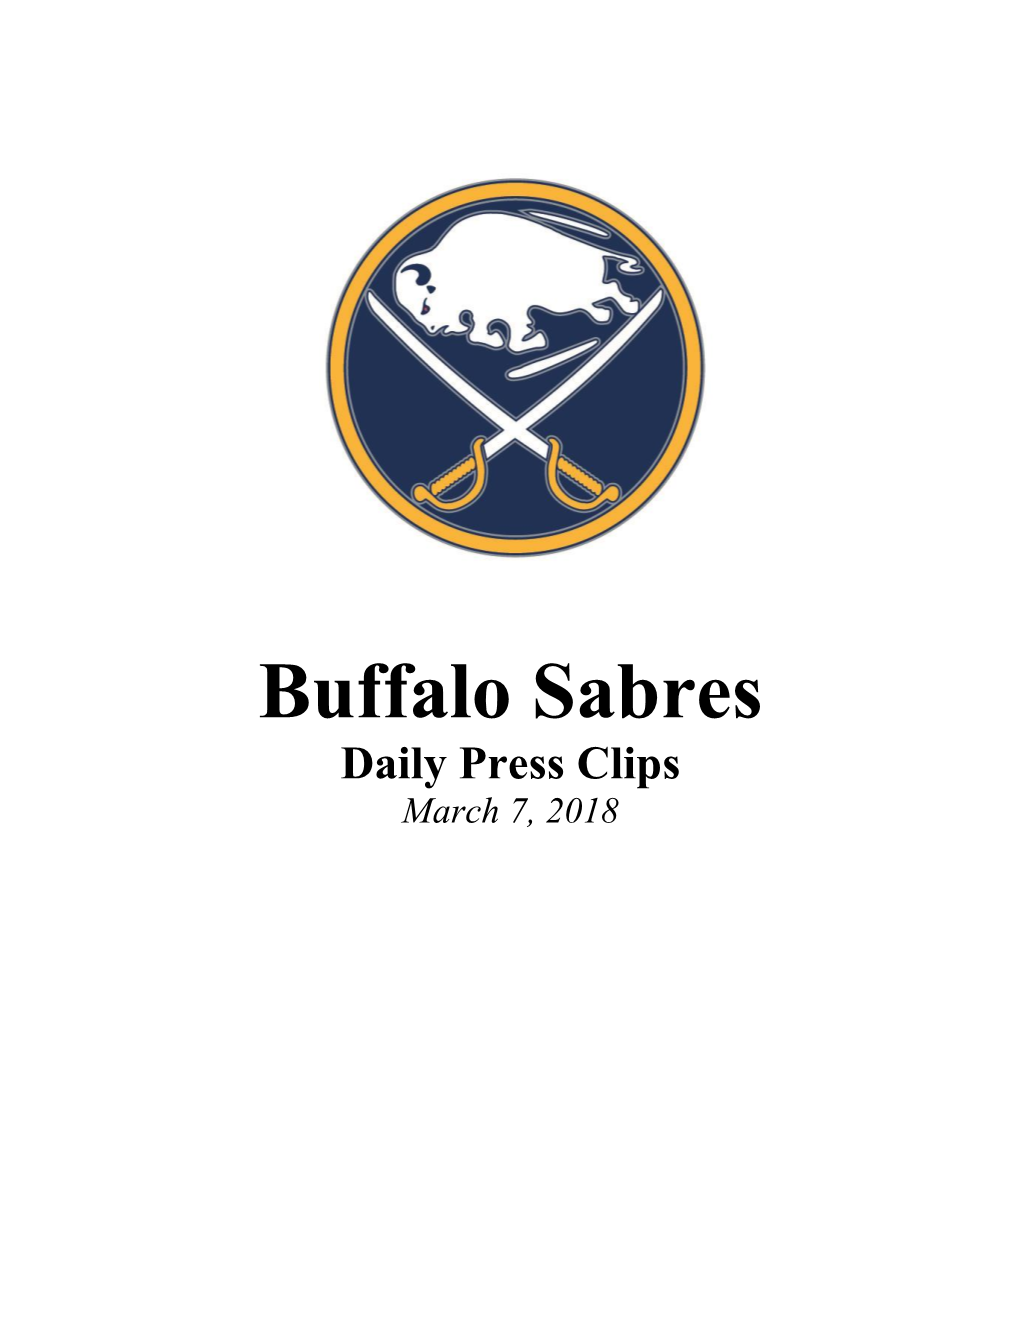 Daily Press Clips March 7, 2018